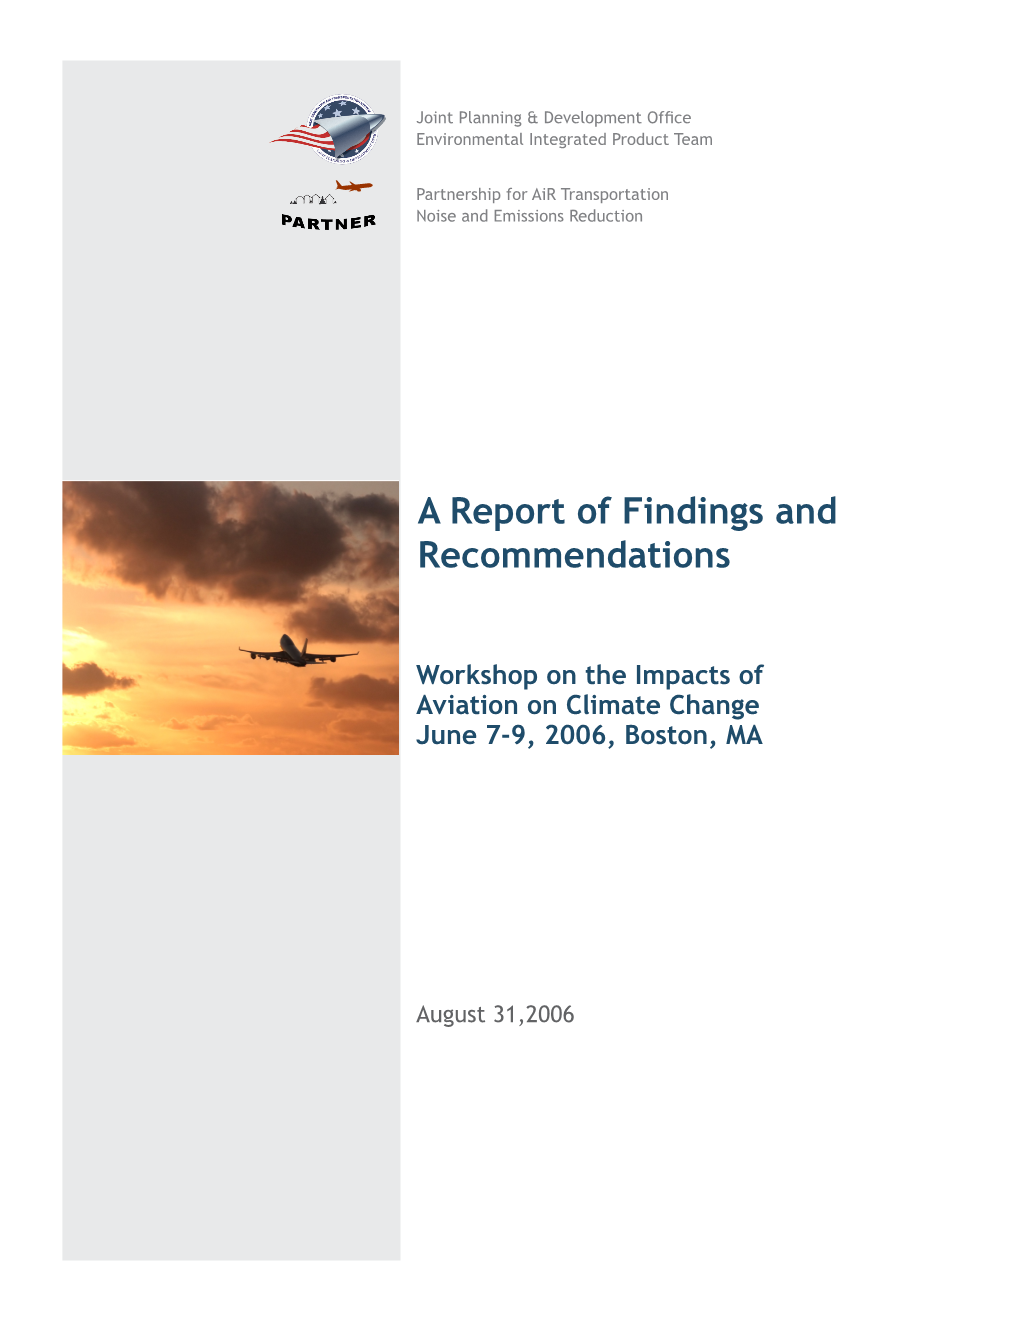 A Report of Findings and Recommendations Add Picture